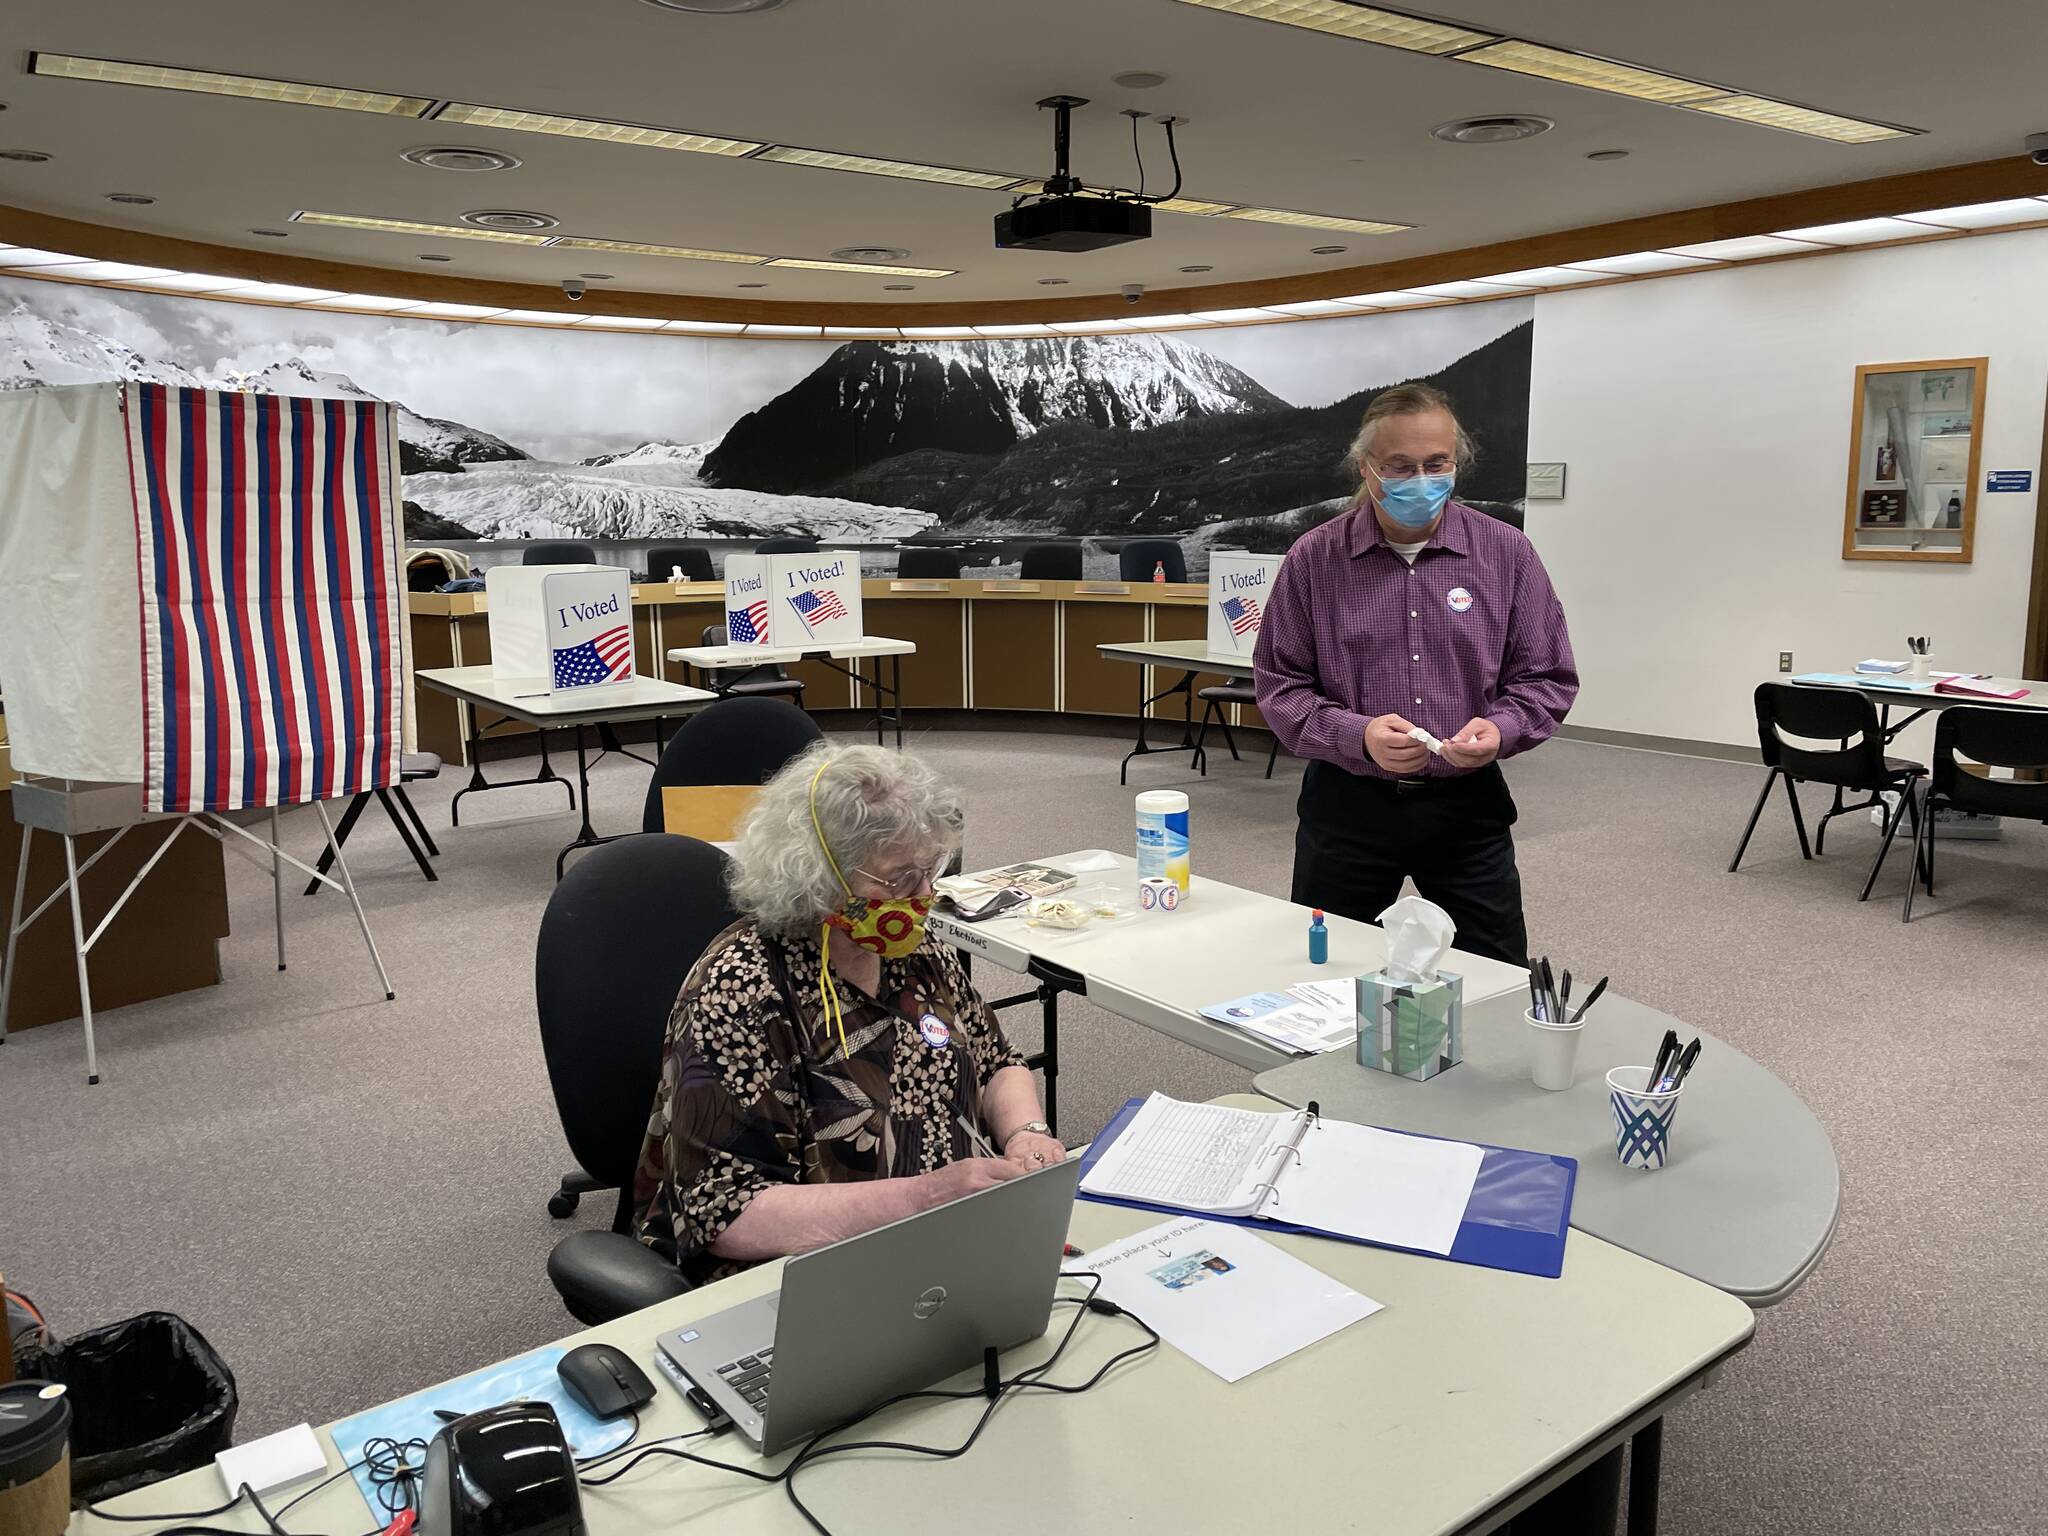 Election workers Nora Laughlin and Bob Laurie man the City Hall election station on the last day of voting for Juneau's municipal election, Oct. 5, 2021. On Friday, results started to roll in with more expected Monday. (Michael S. Lockett / Juneau Empire)